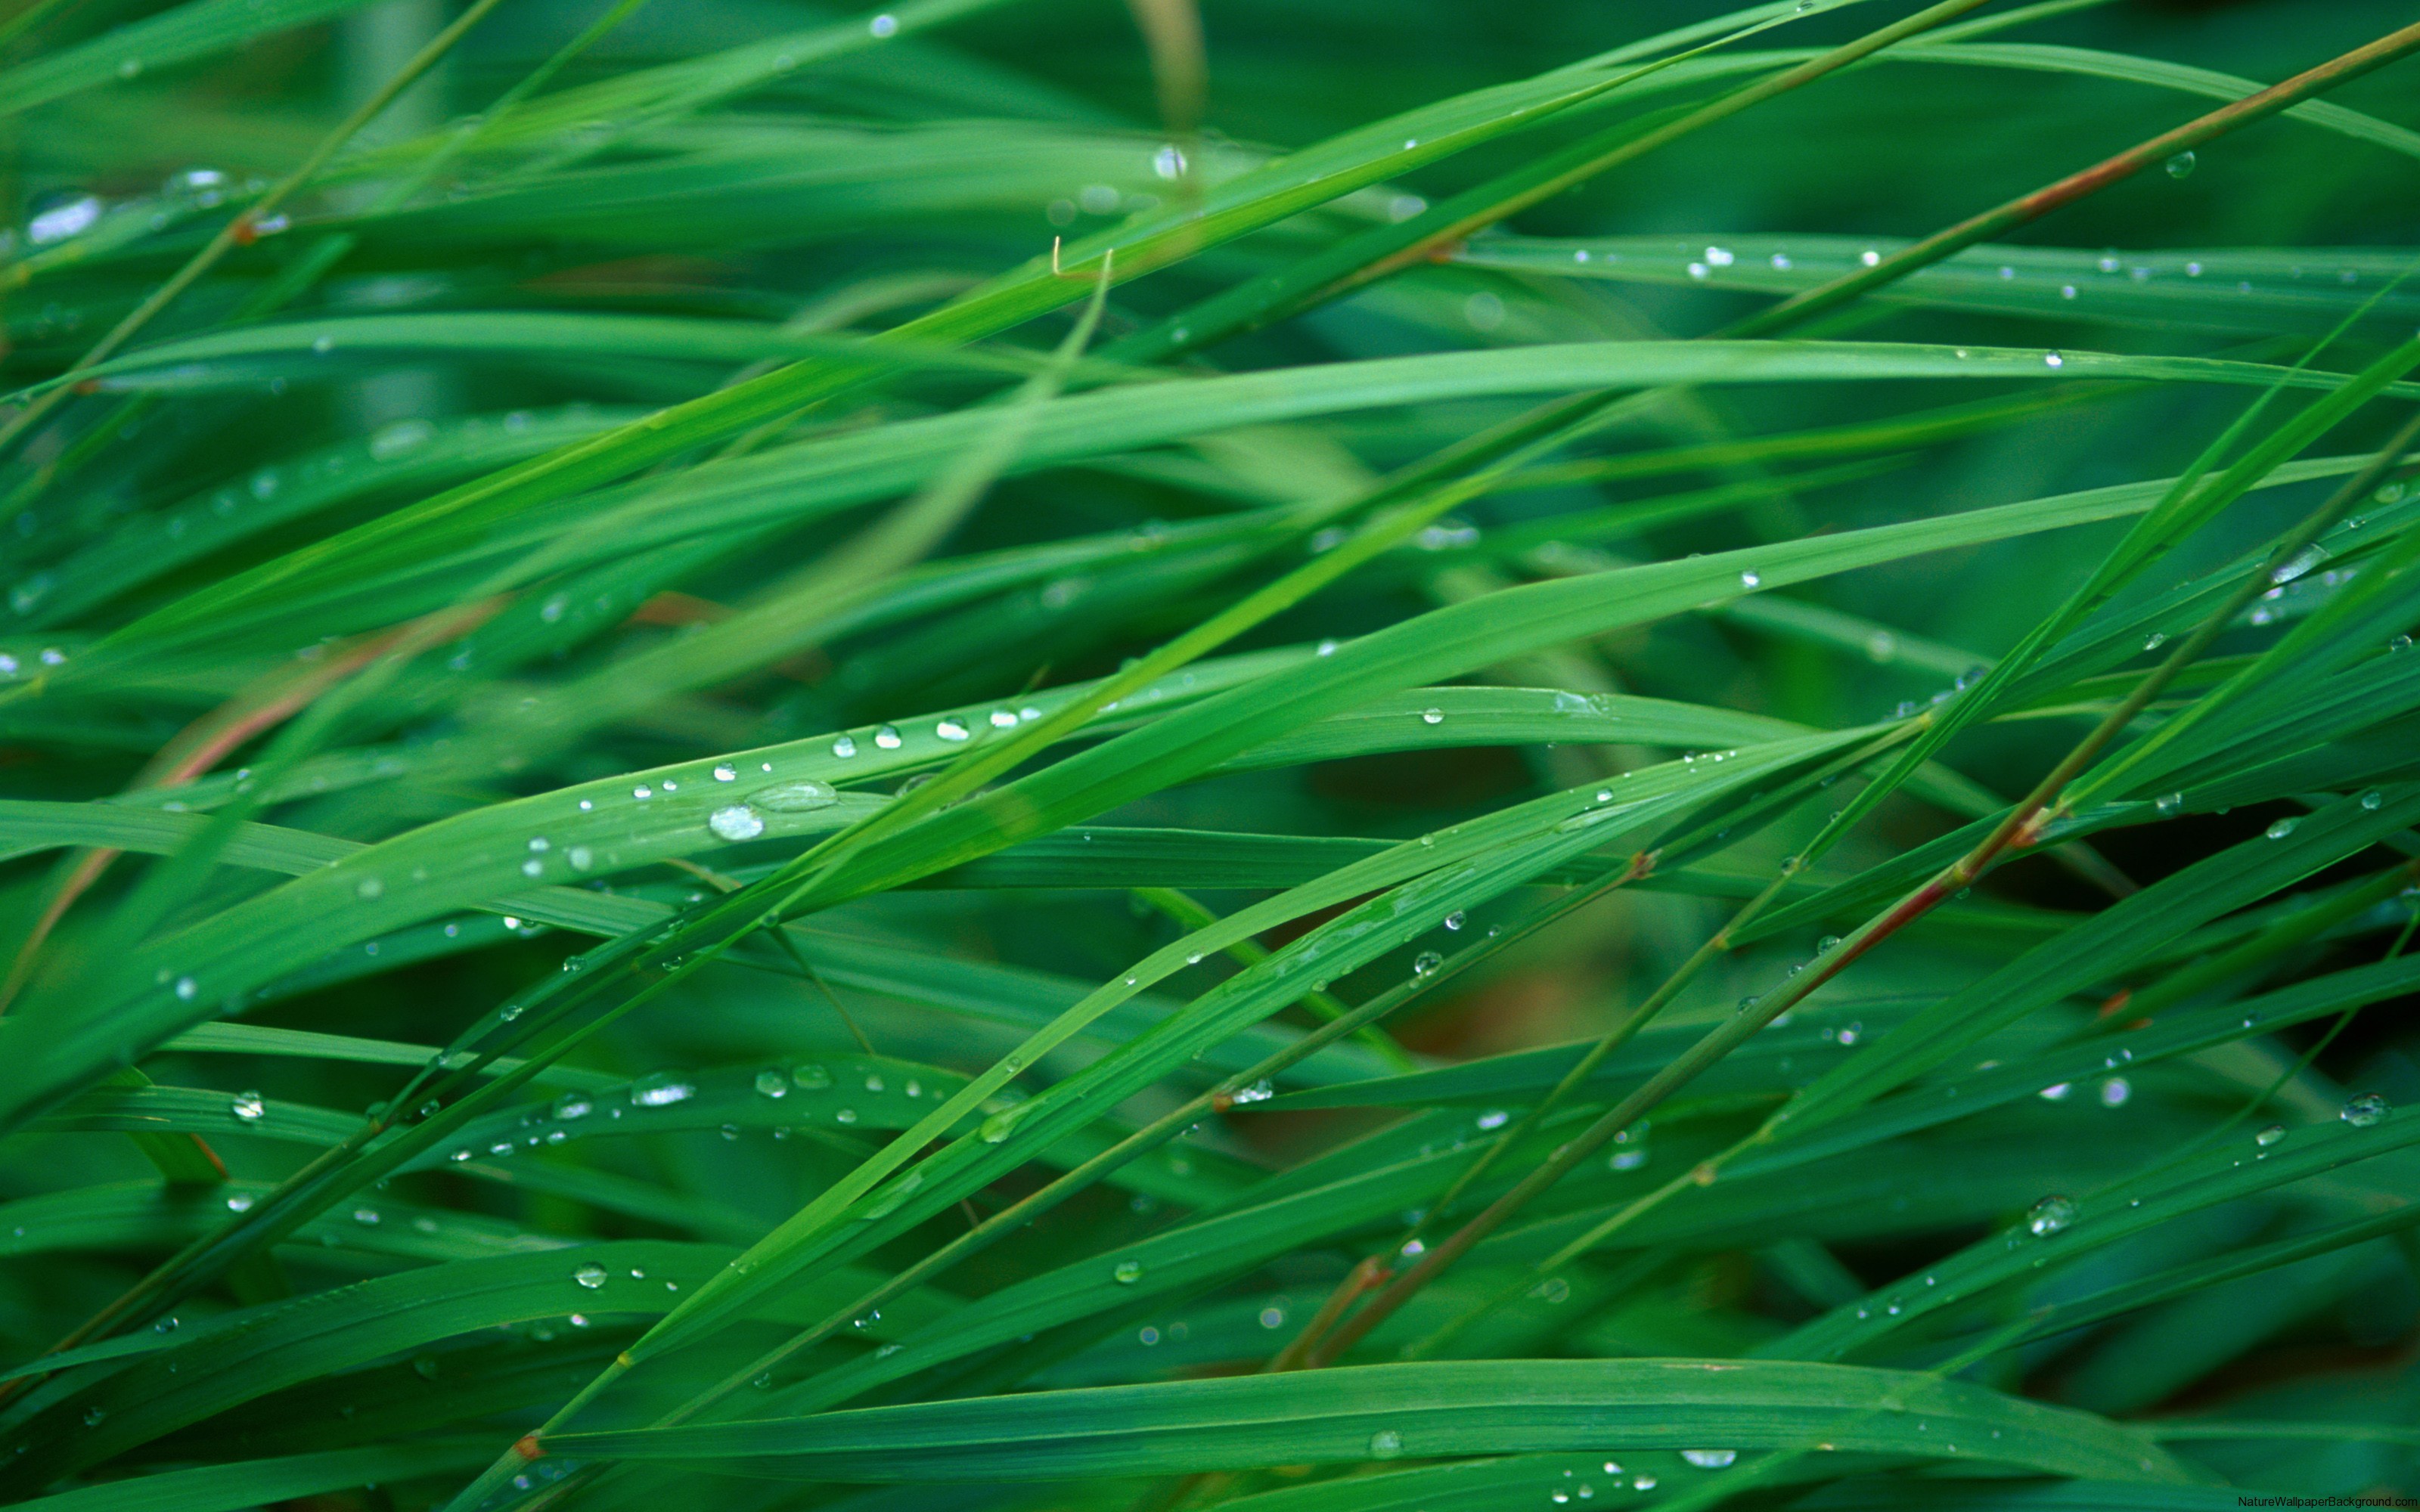 3200x2000 Up close blades of grass with water droplets wallpaper